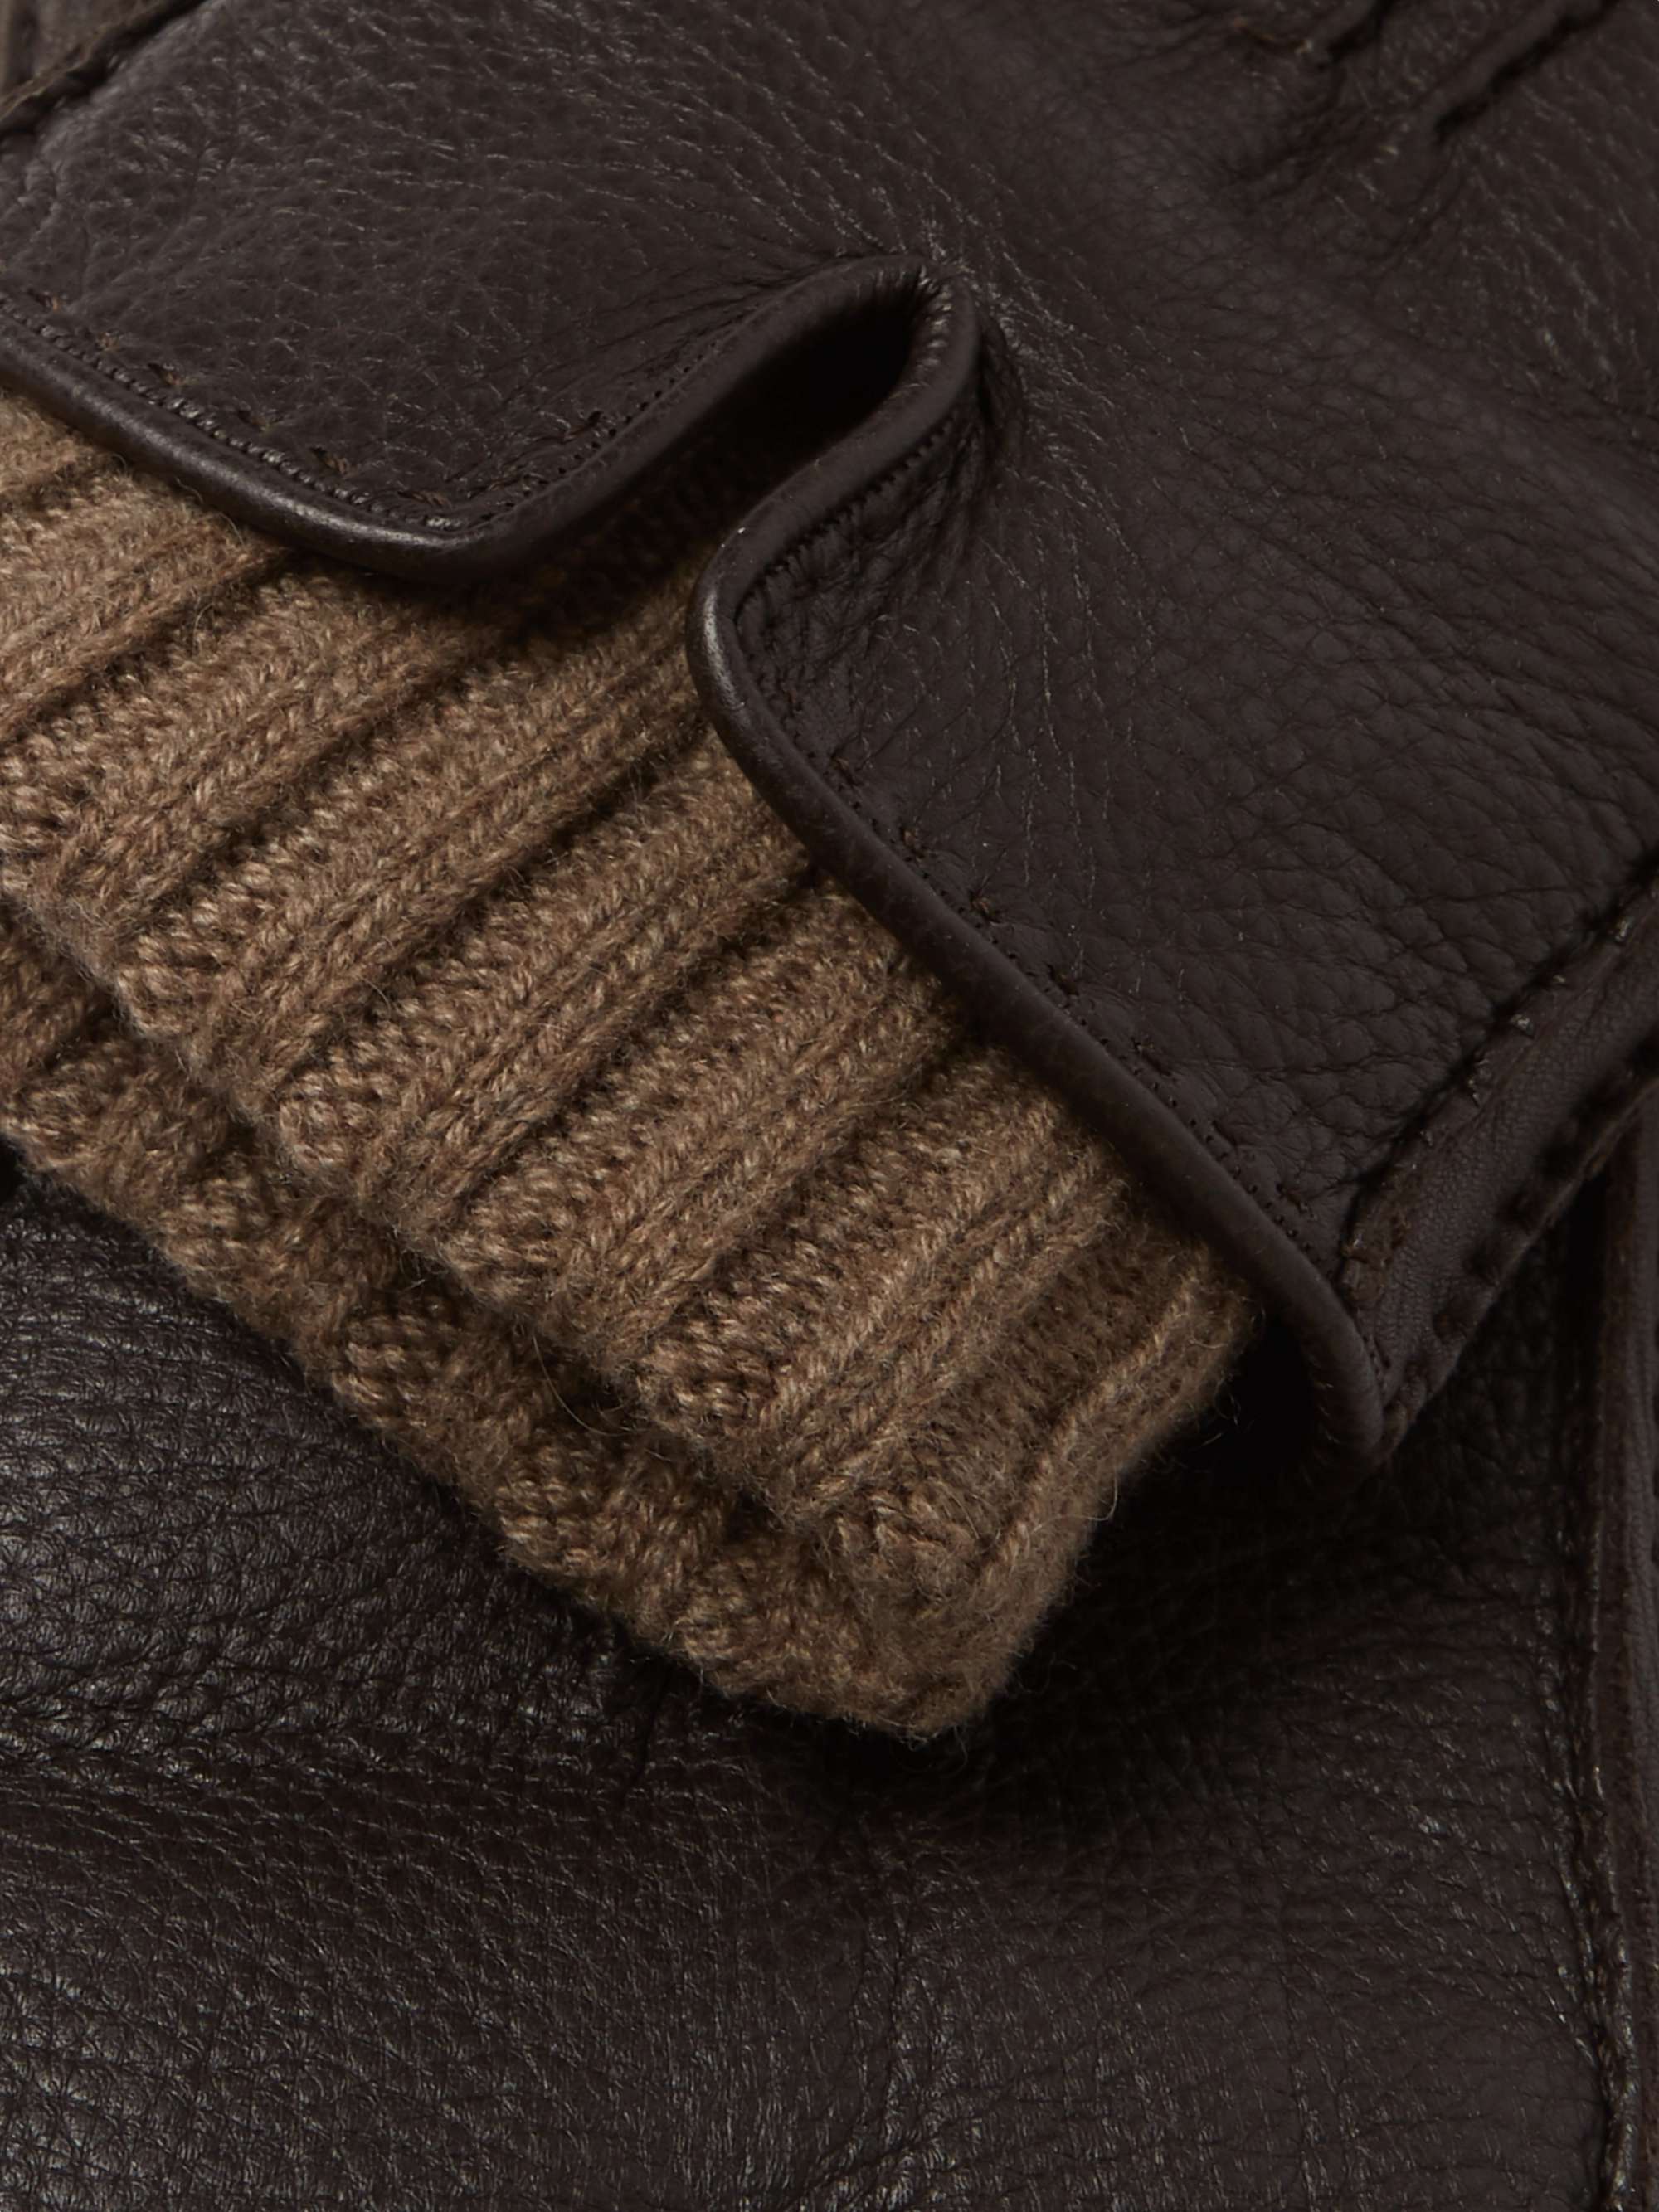 LORO PIANA Baby Cashmere-Lined Full-Grain Leather Gloves